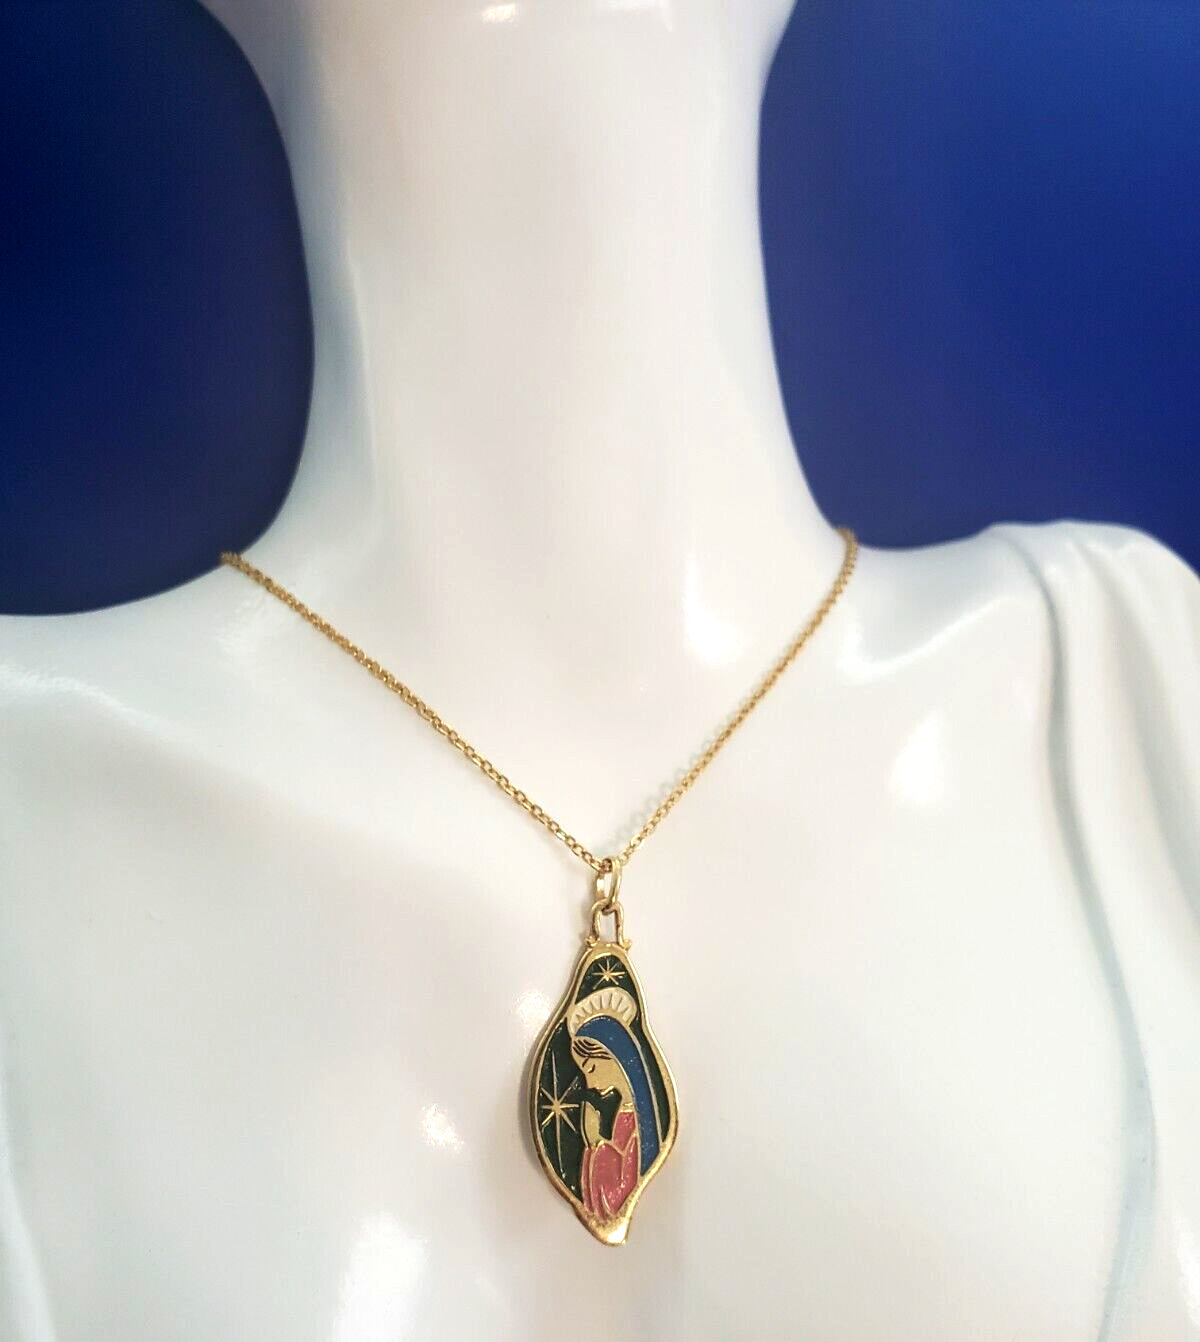 Enamel pendant Madonna and gold tone necklace